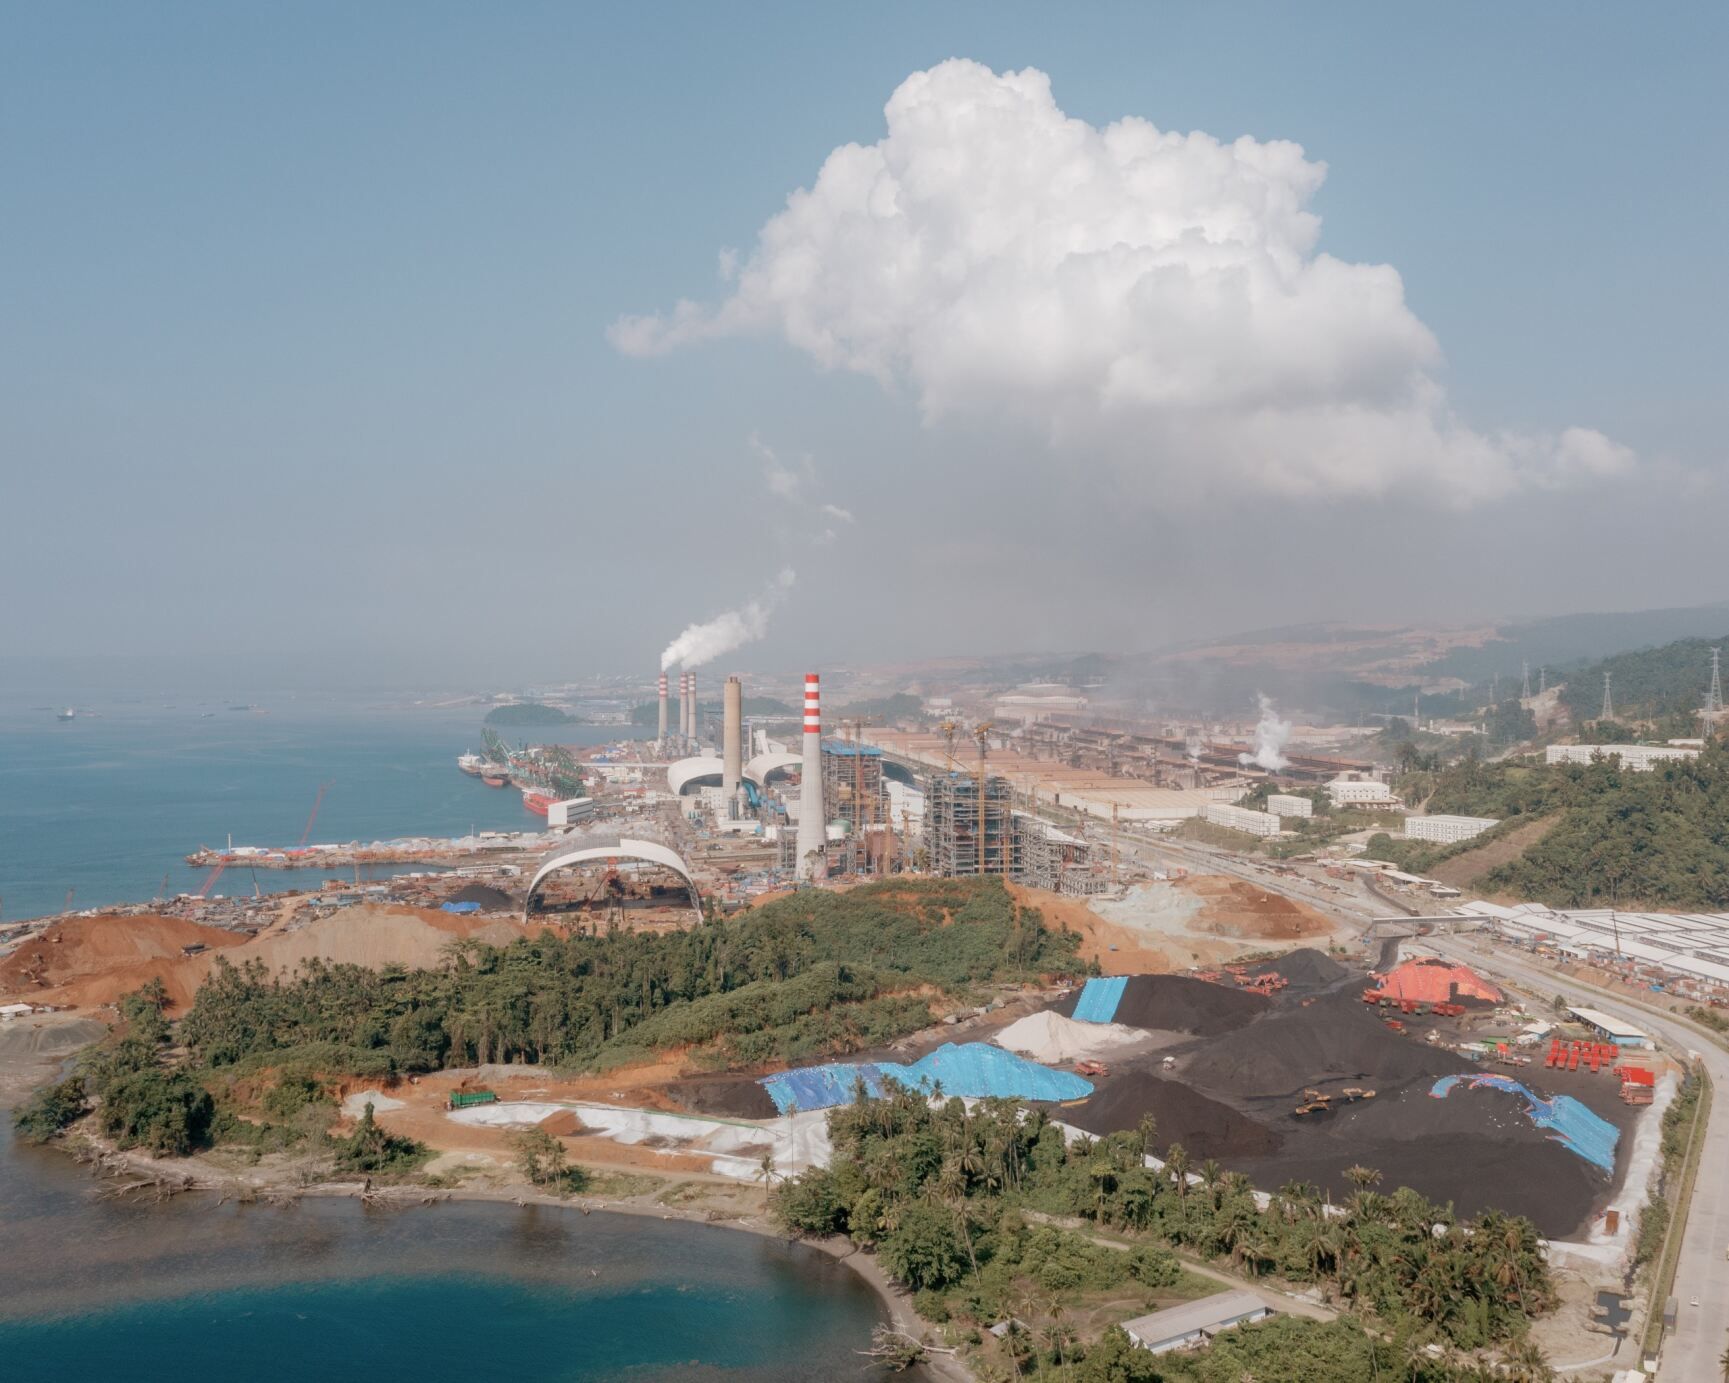 Indonesia: Huge Nickel Project Driving Climate, Rights, Environmental Harms